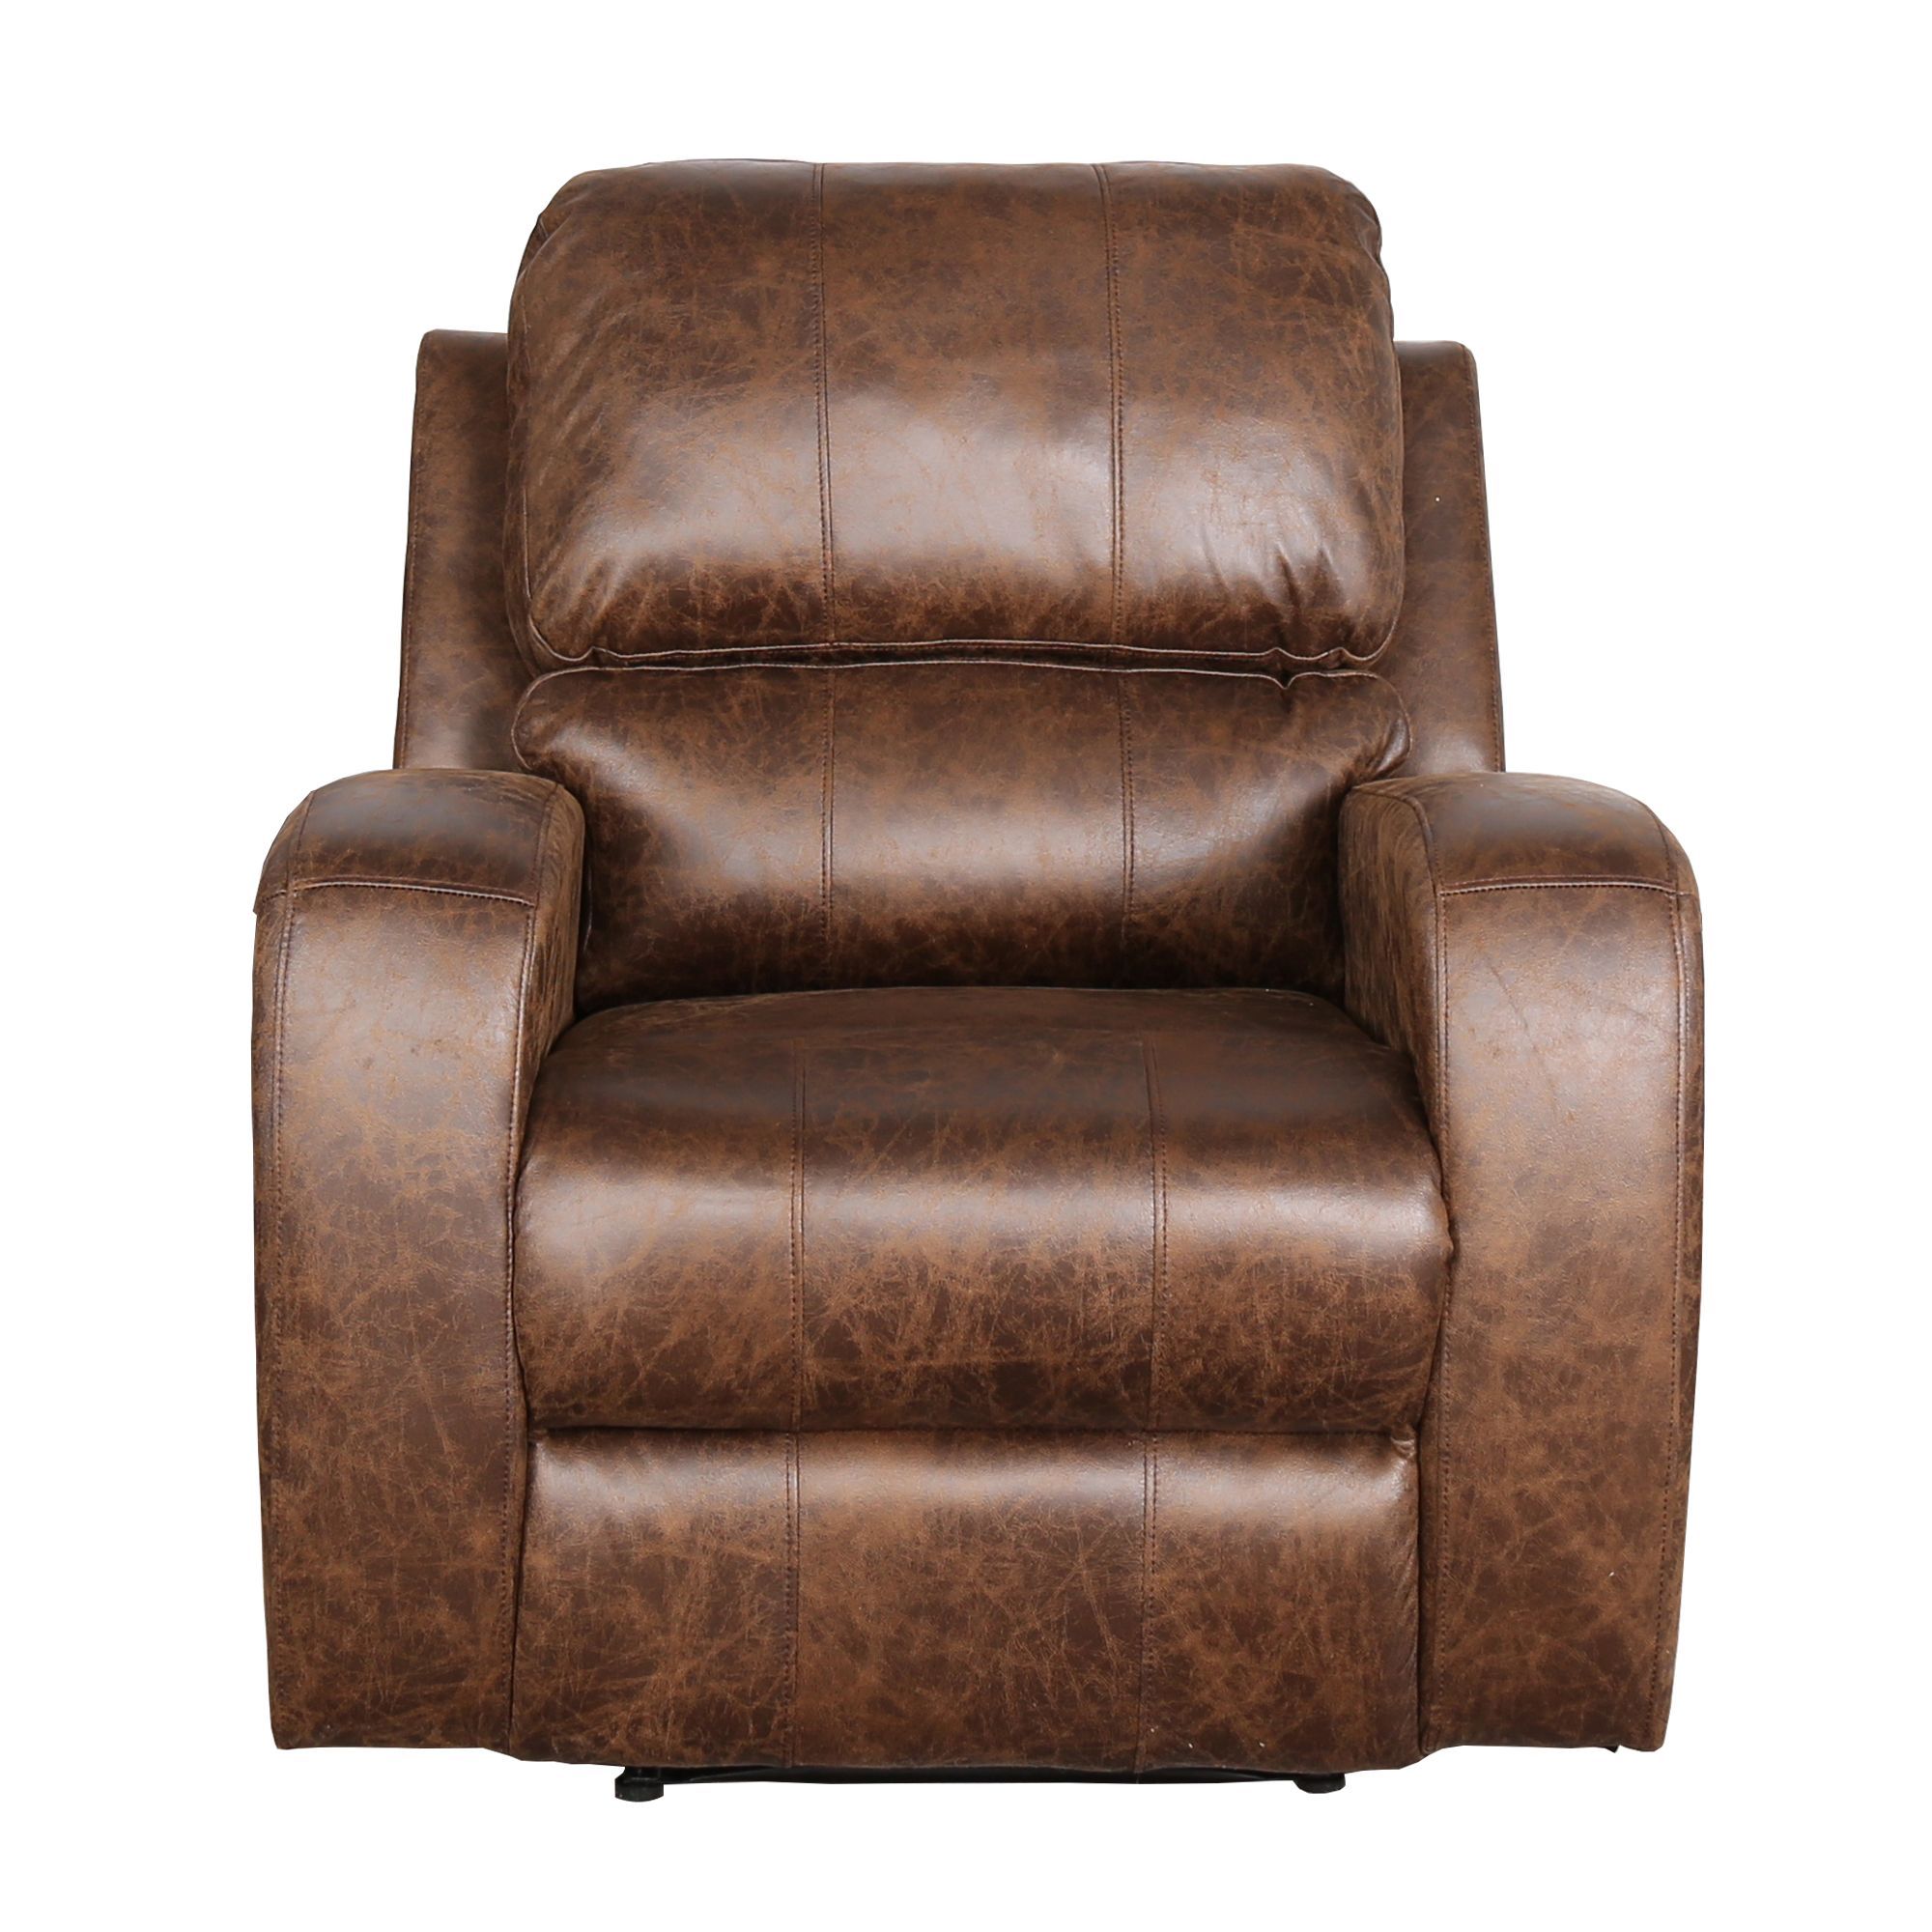 Power Electric Bonded PU Leather Recliner Chair with USB Charge Port, Vintage Home Theater Seating,Classic Single Sofa Seat-Nut Brown-CASAINC